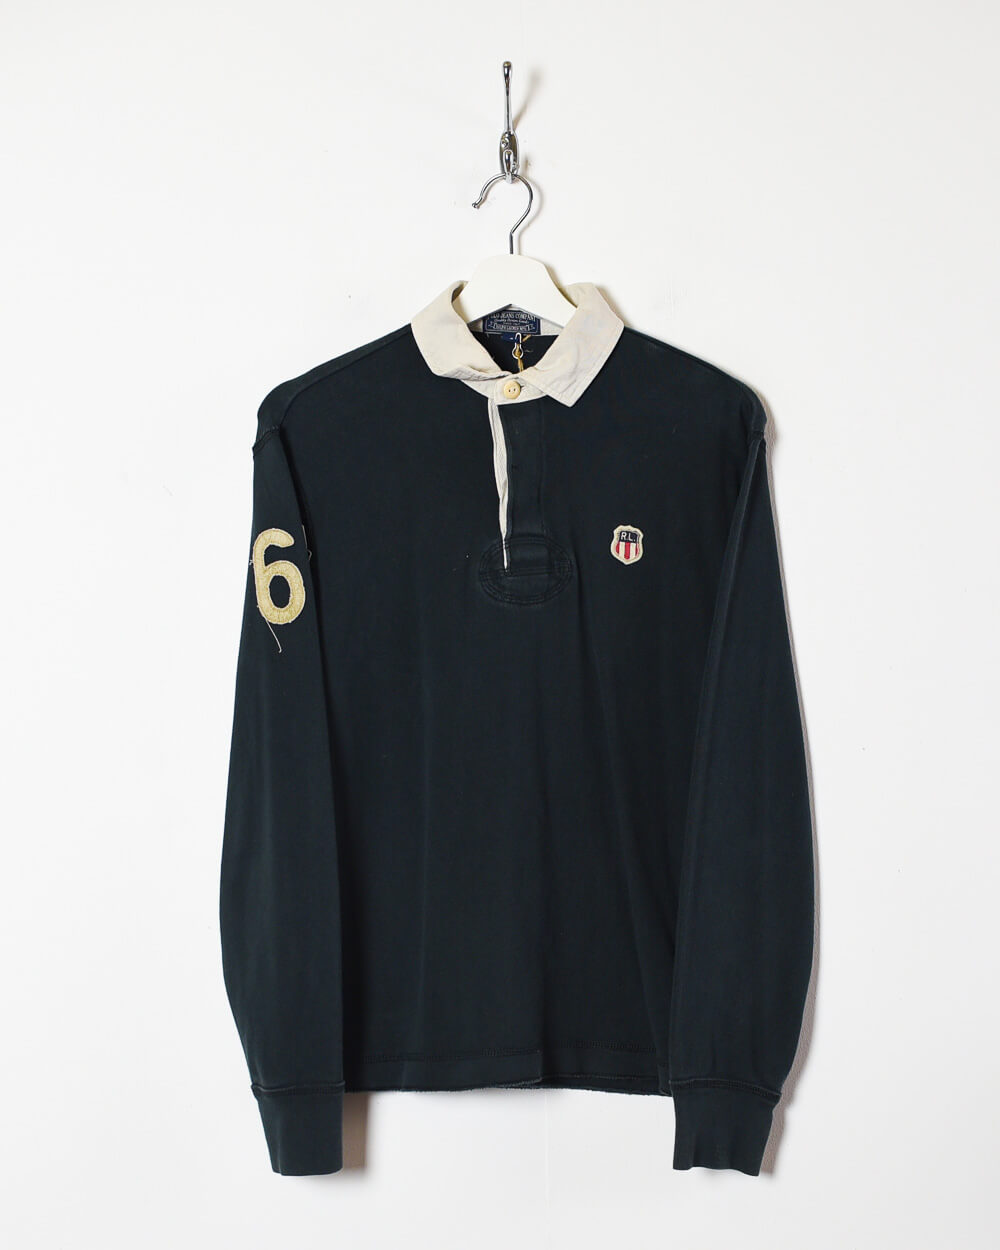 Black Ralph Lauren Polo Jeans Company Rugby Shirt - X-Small